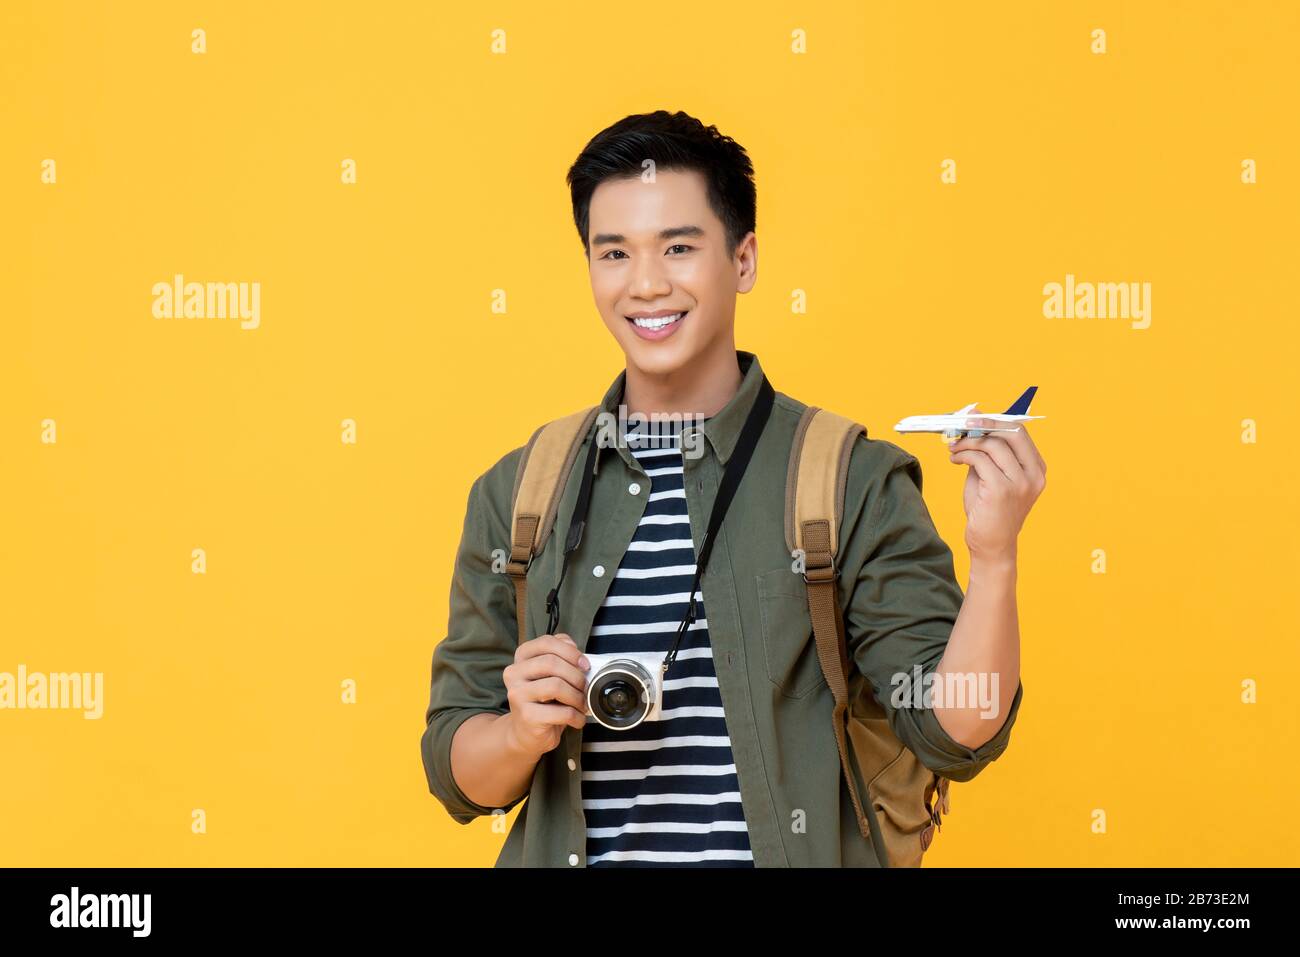 Young handsome smiling Asian tourist man holding plane model and camera isolated on yellow background Stock Photo